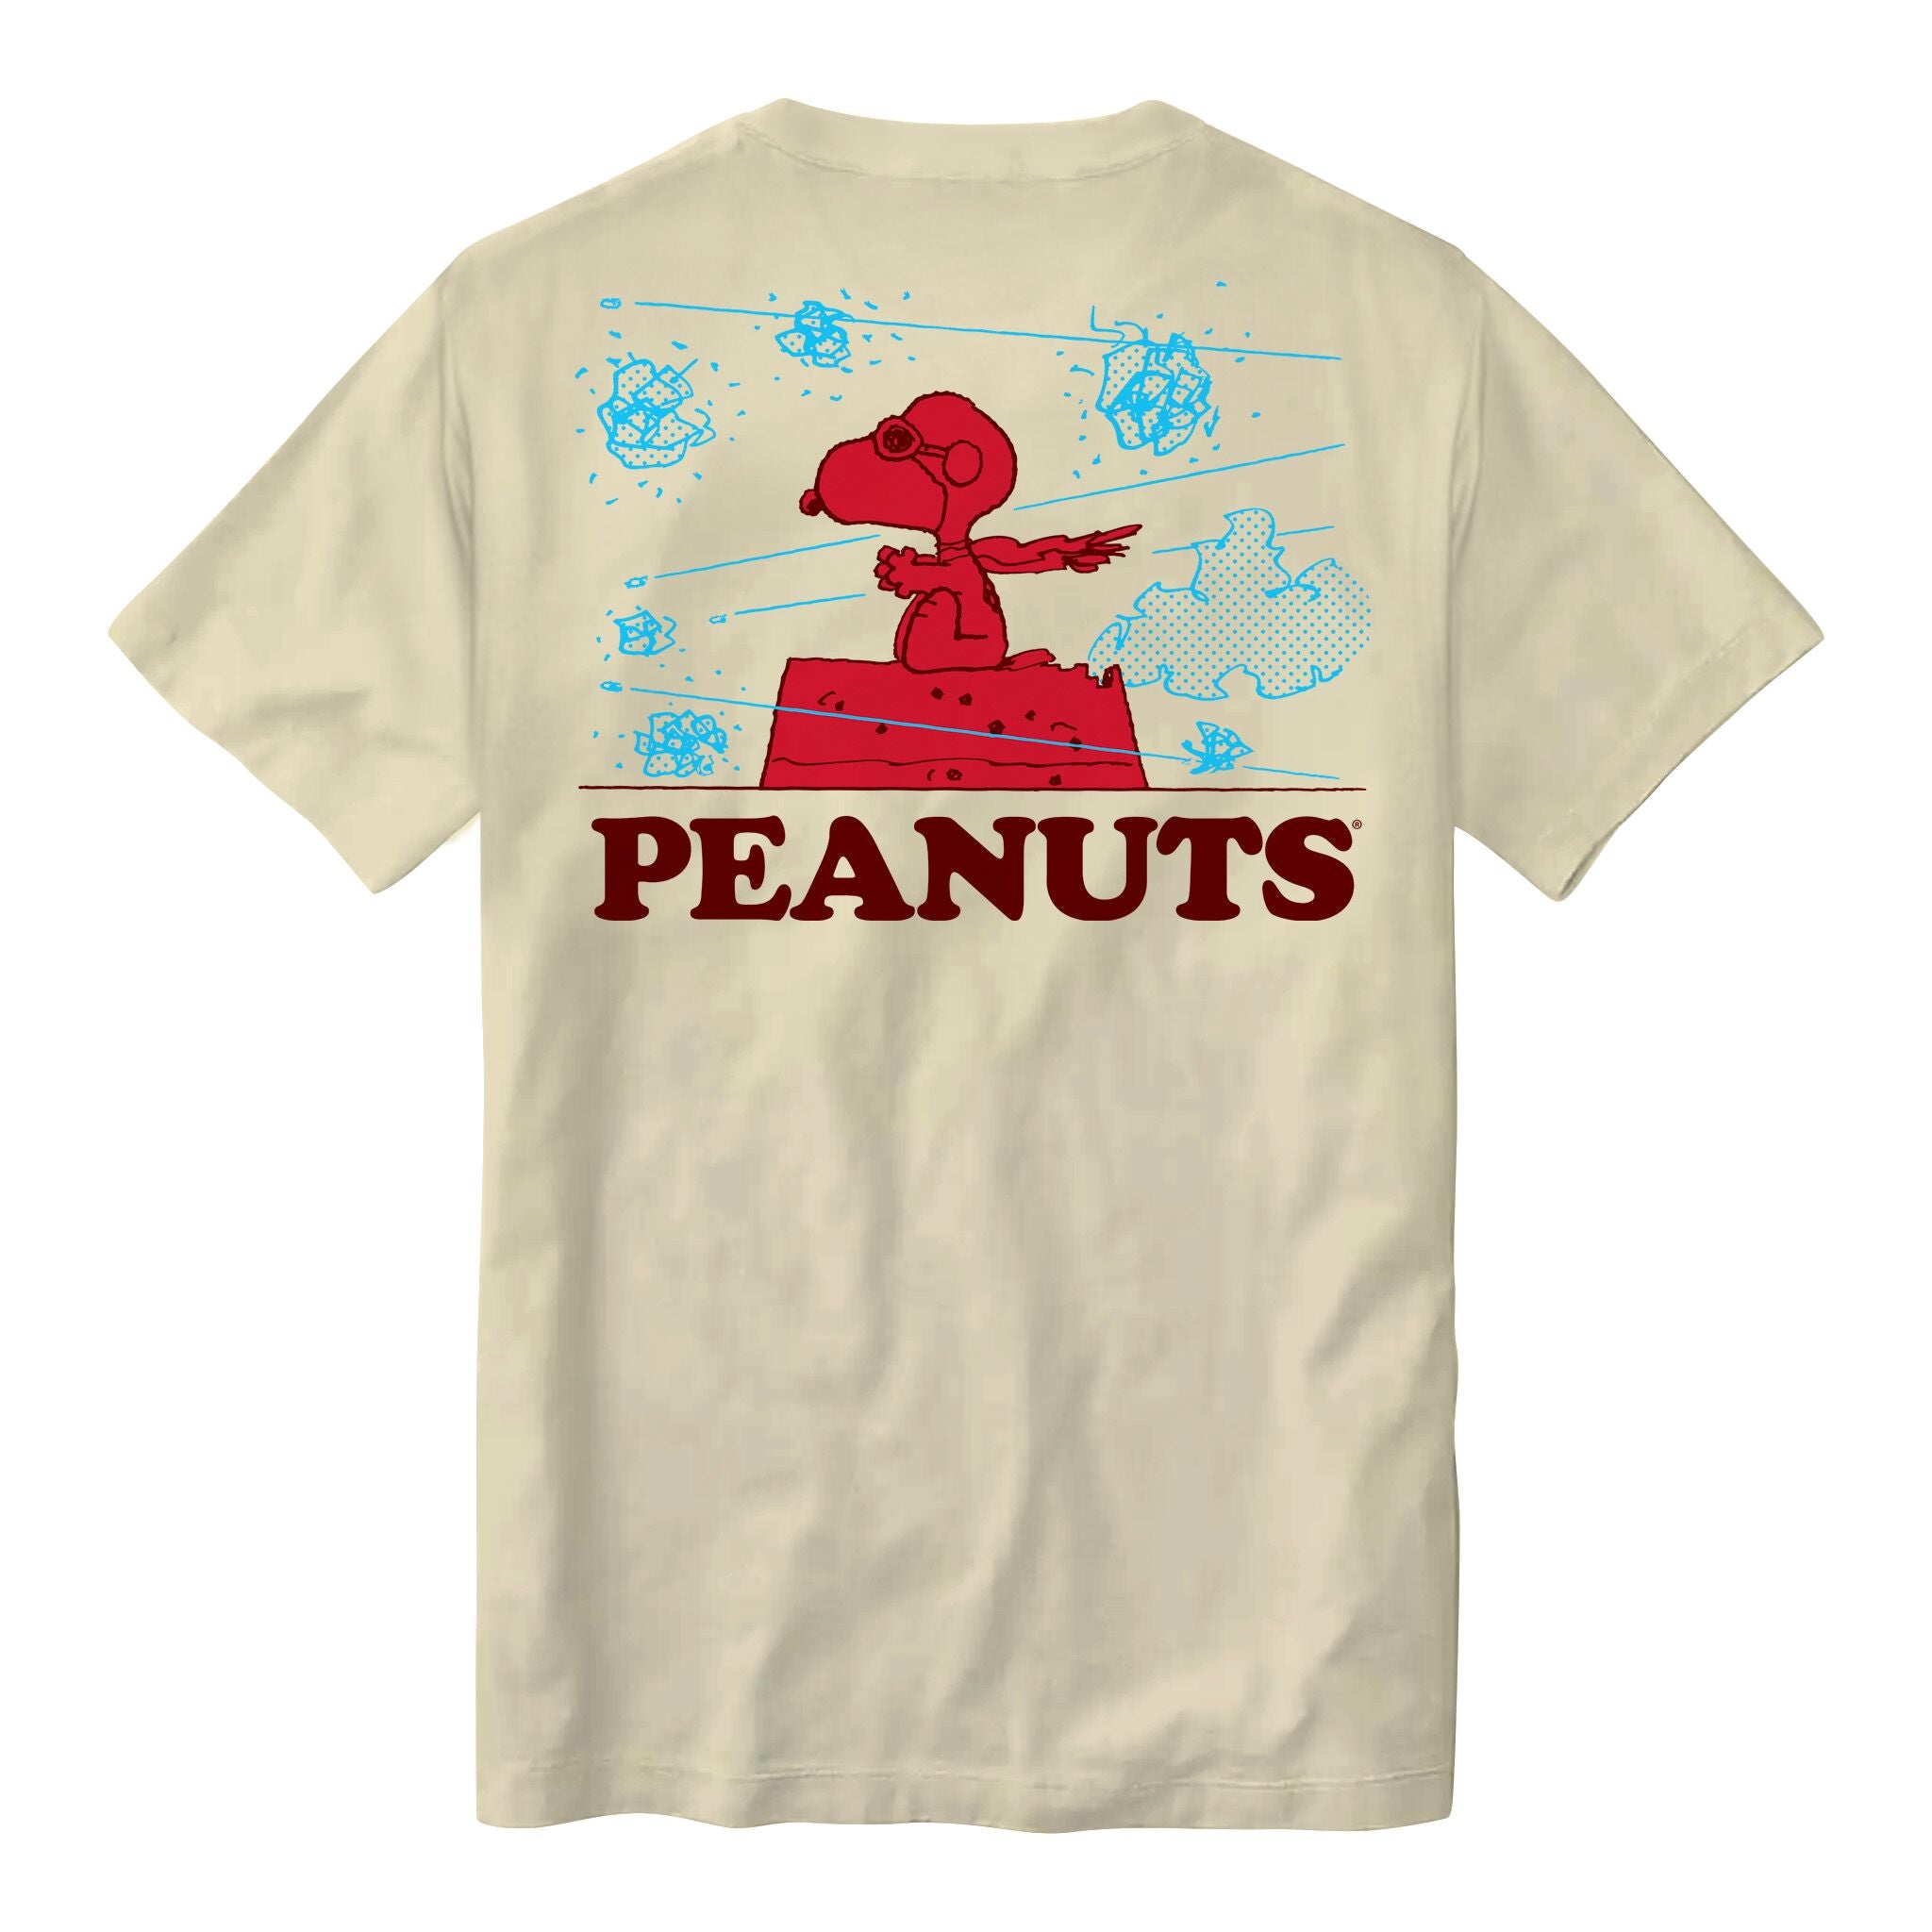 Peanuts T-shirt - Snoopy Flying Ace